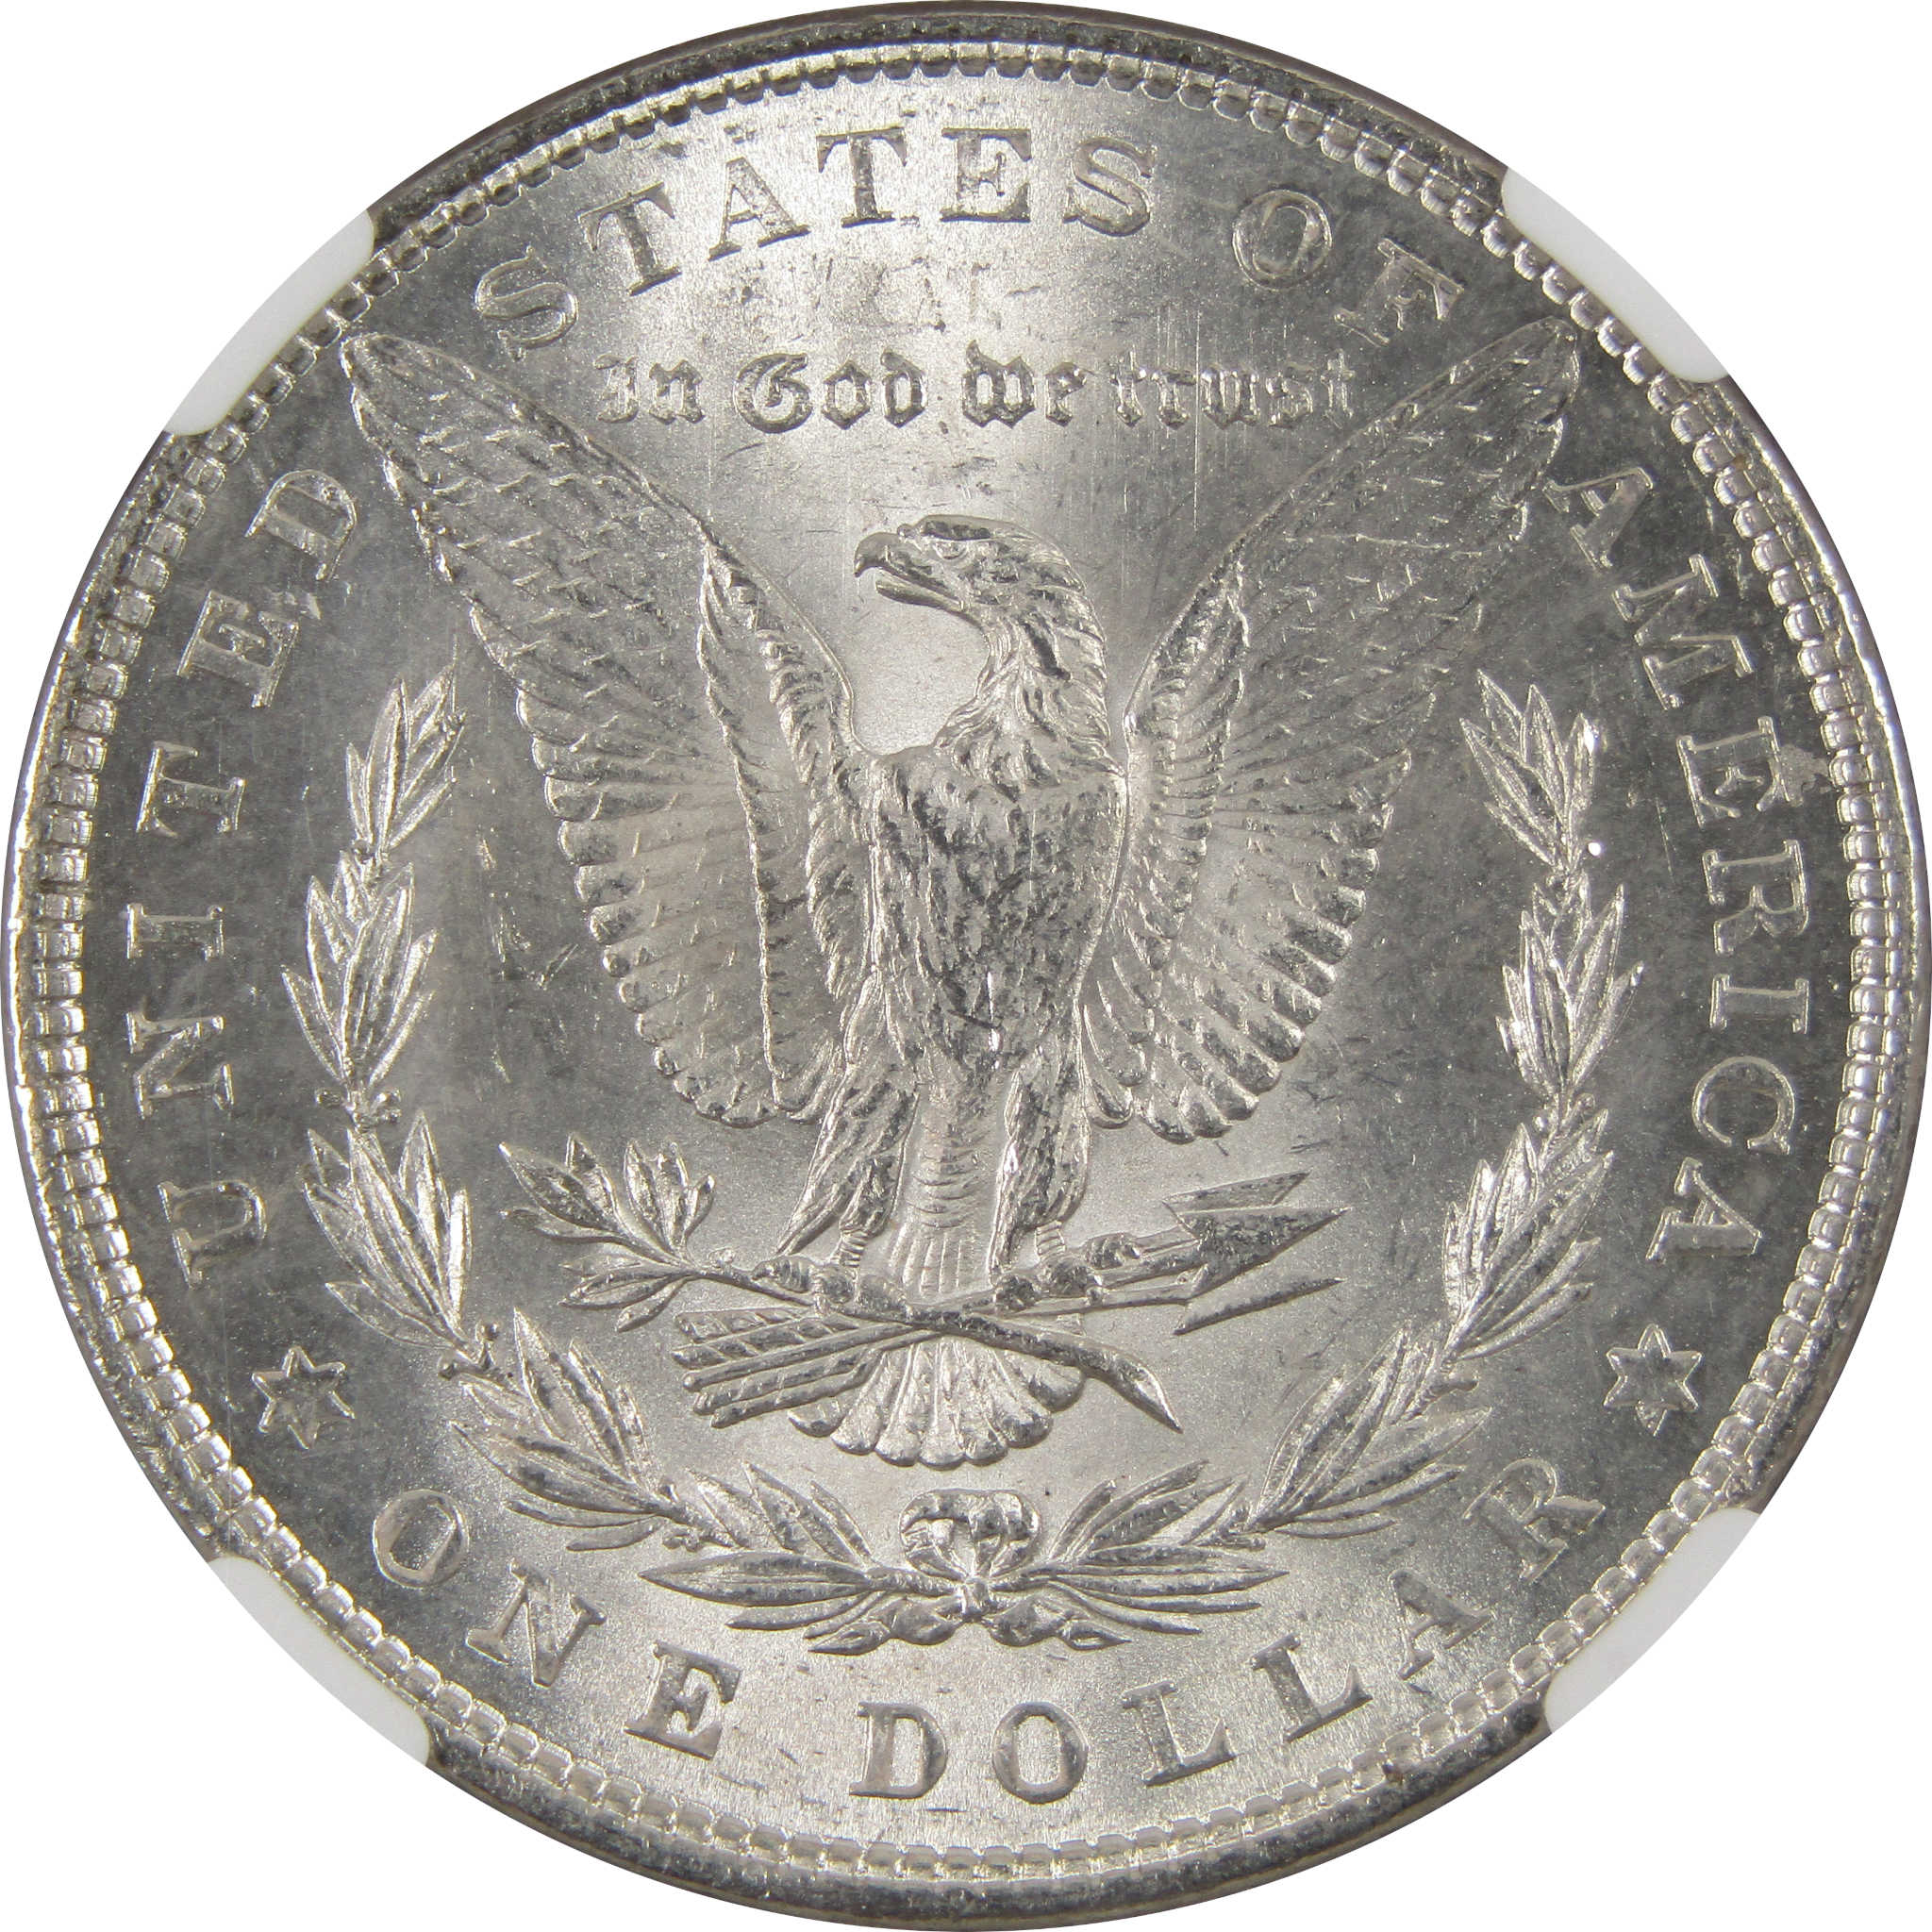 1878 7TF Rev 79 Morgan Dollar MS 62 NGC 90% Silver $1 Unc SKU:I9219 - Morgan coin - Morgan silver dollar - Morgan silver dollar for sale - Profile Coins &amp; Collectibles